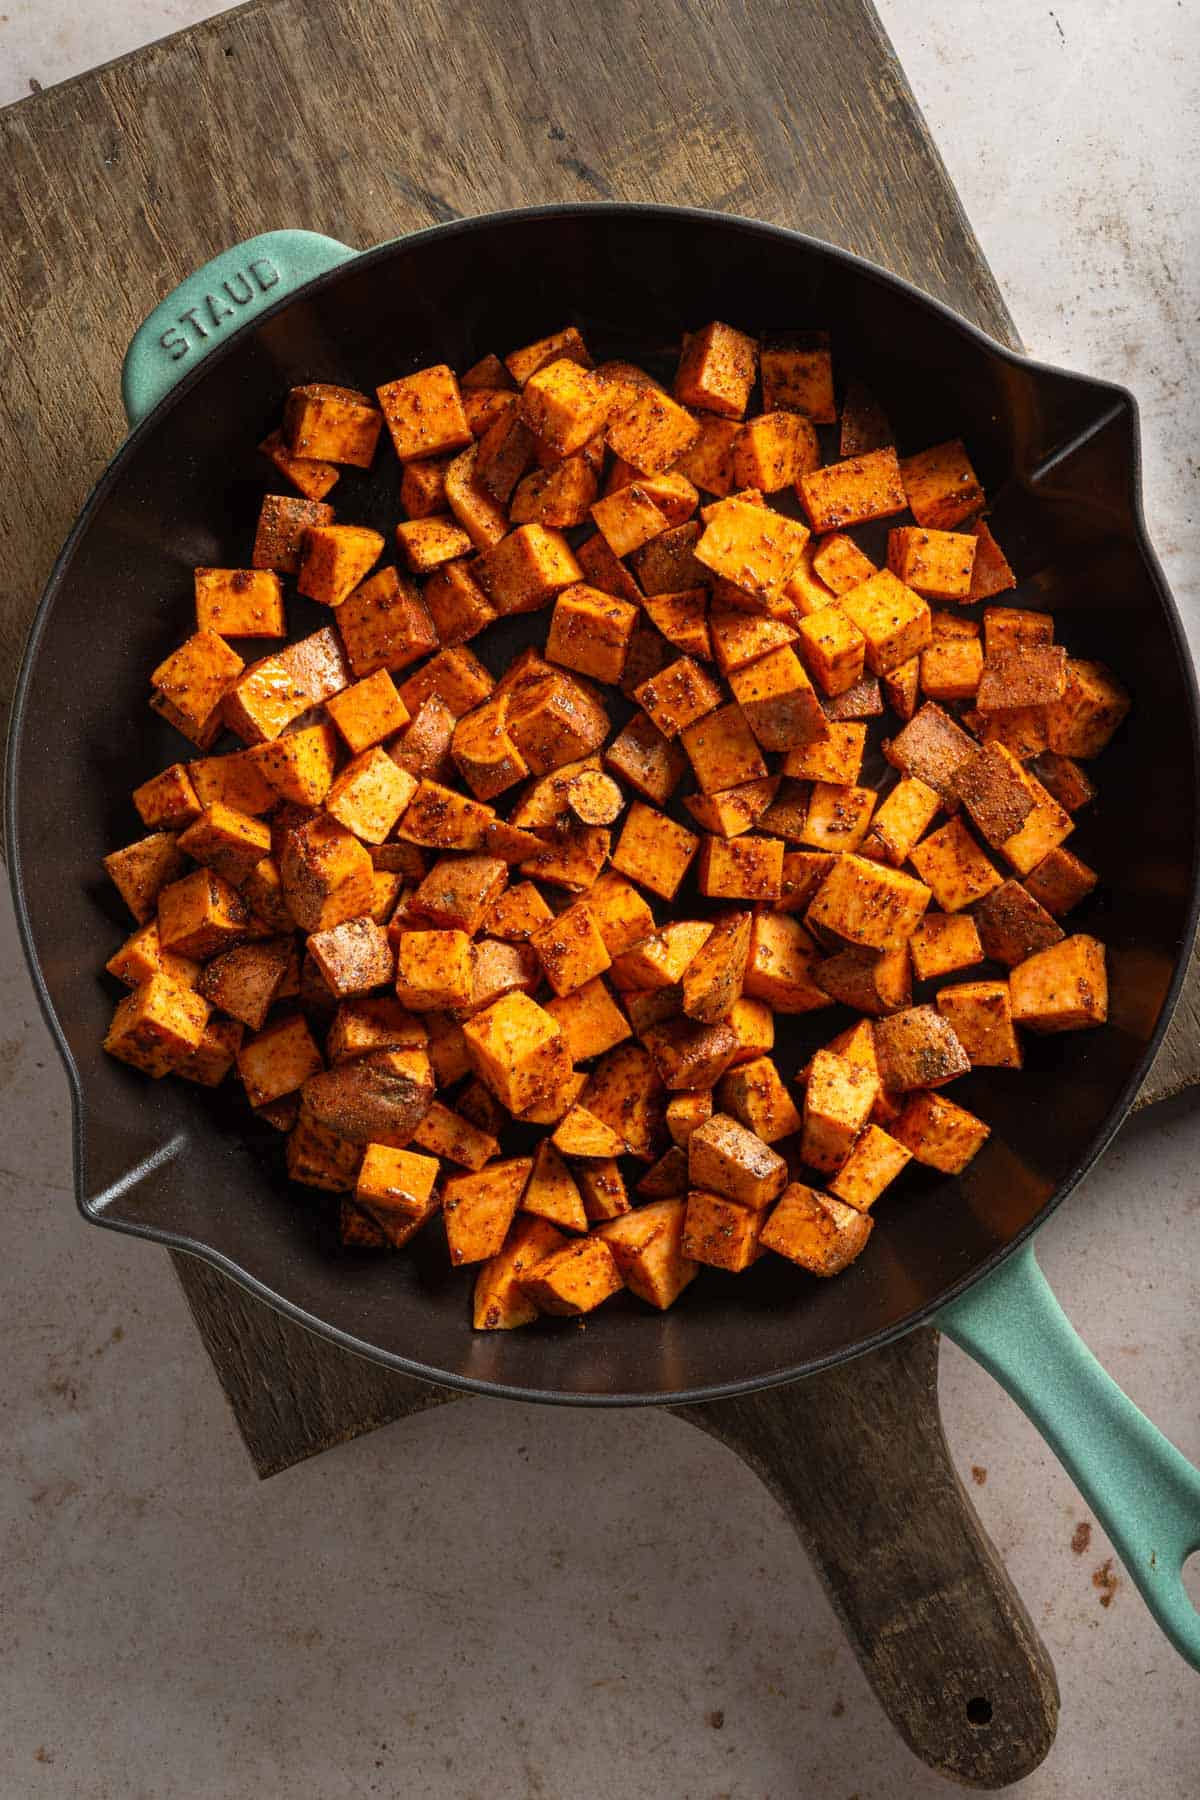 Diced sweet potatoes in a cast iron skillet.